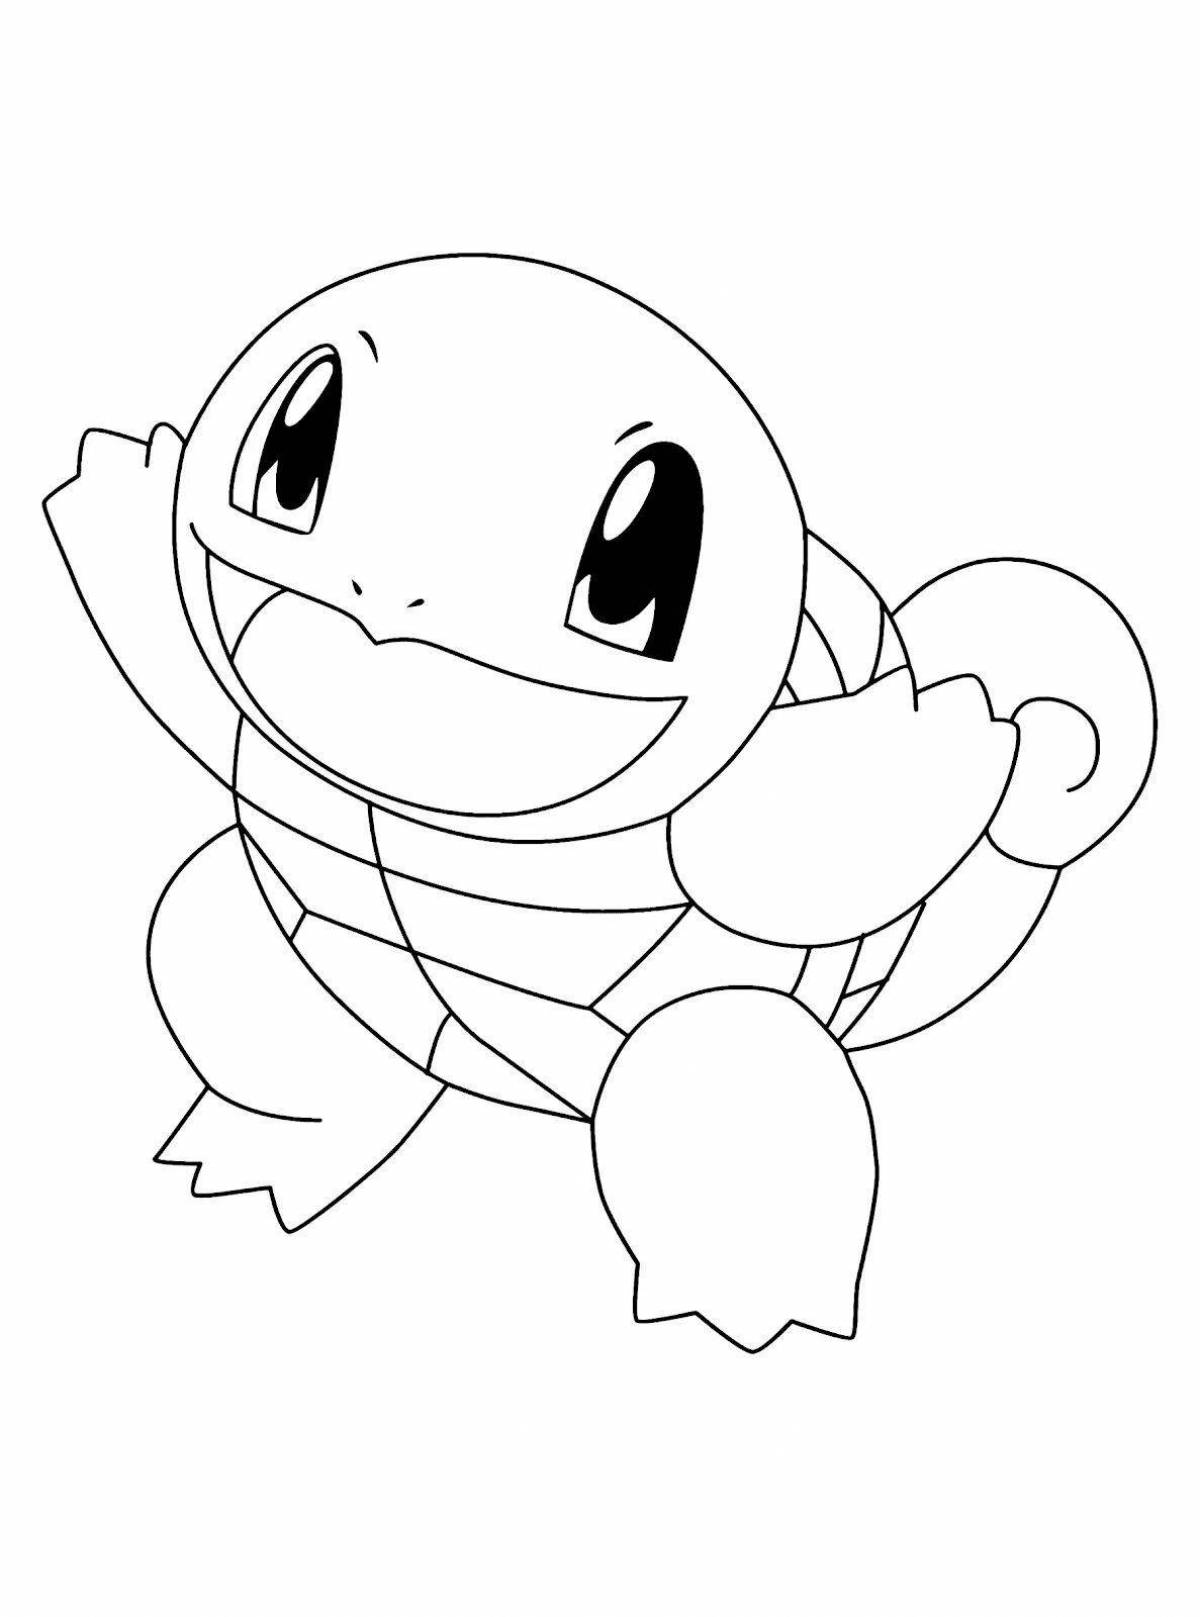 Colorful pokemon squirtle coloring page